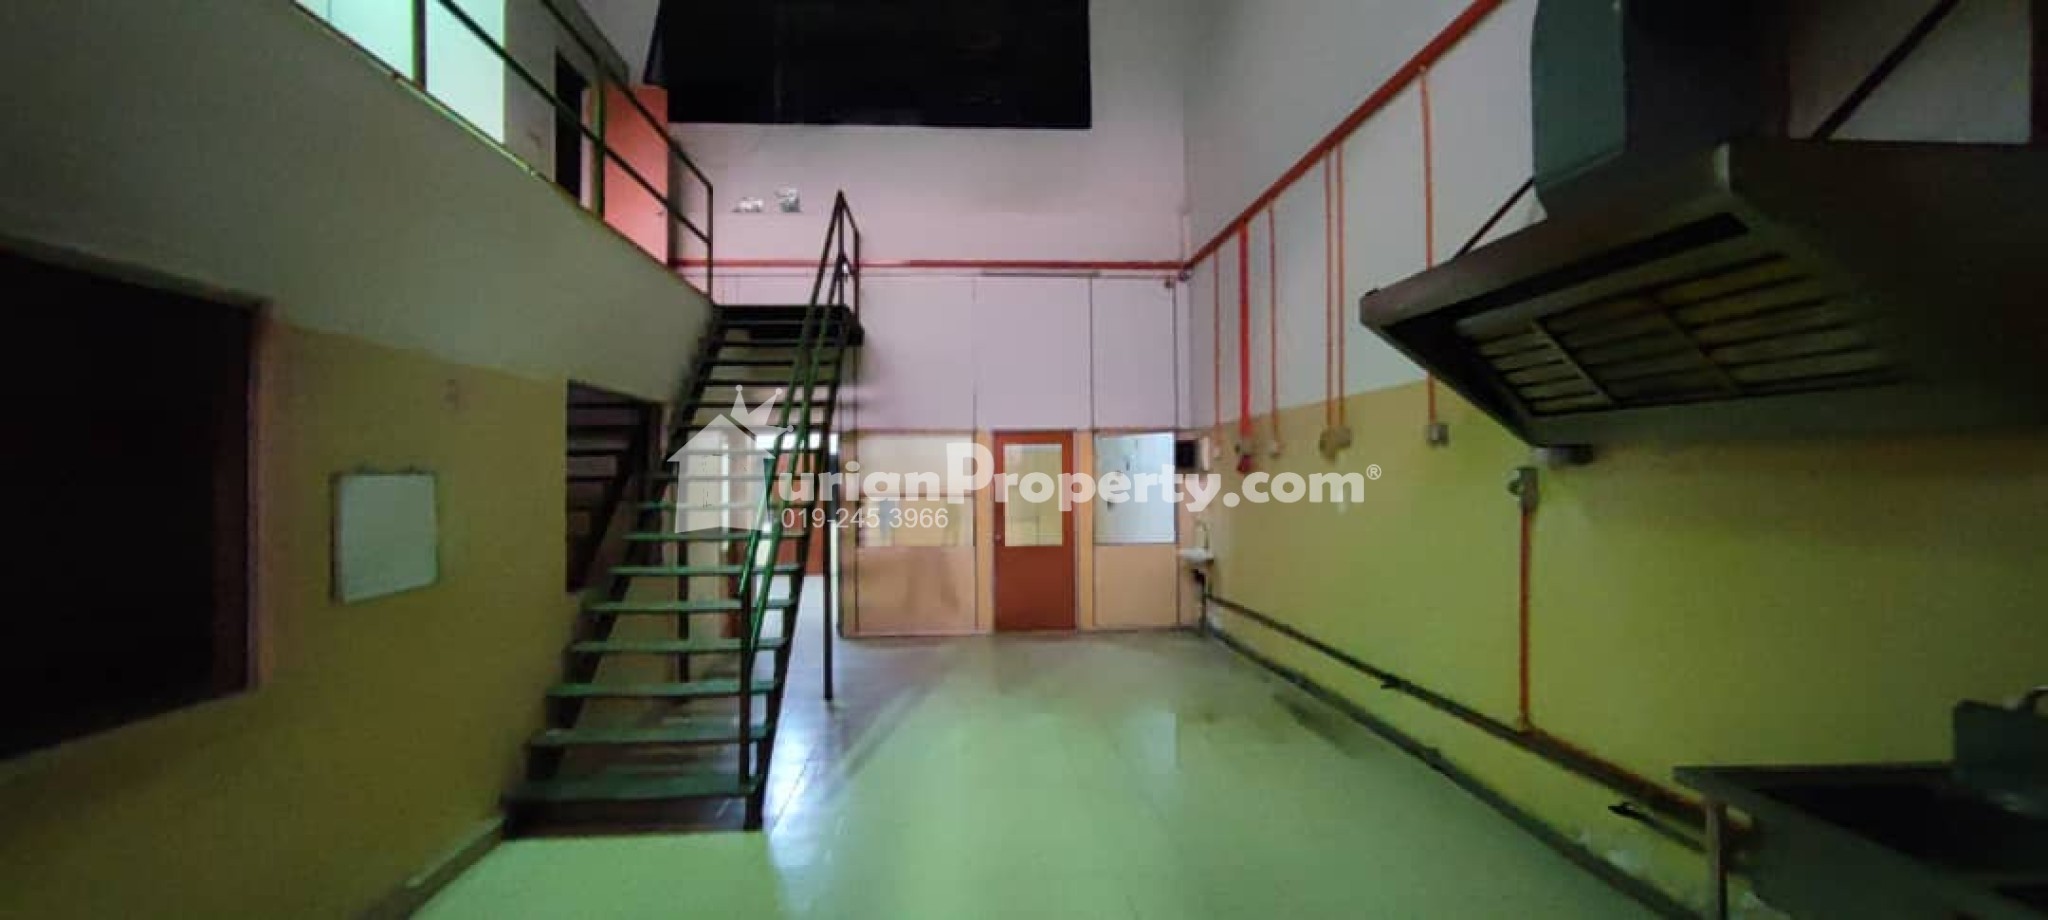 Terrace Factory For Rent at Glenmarie